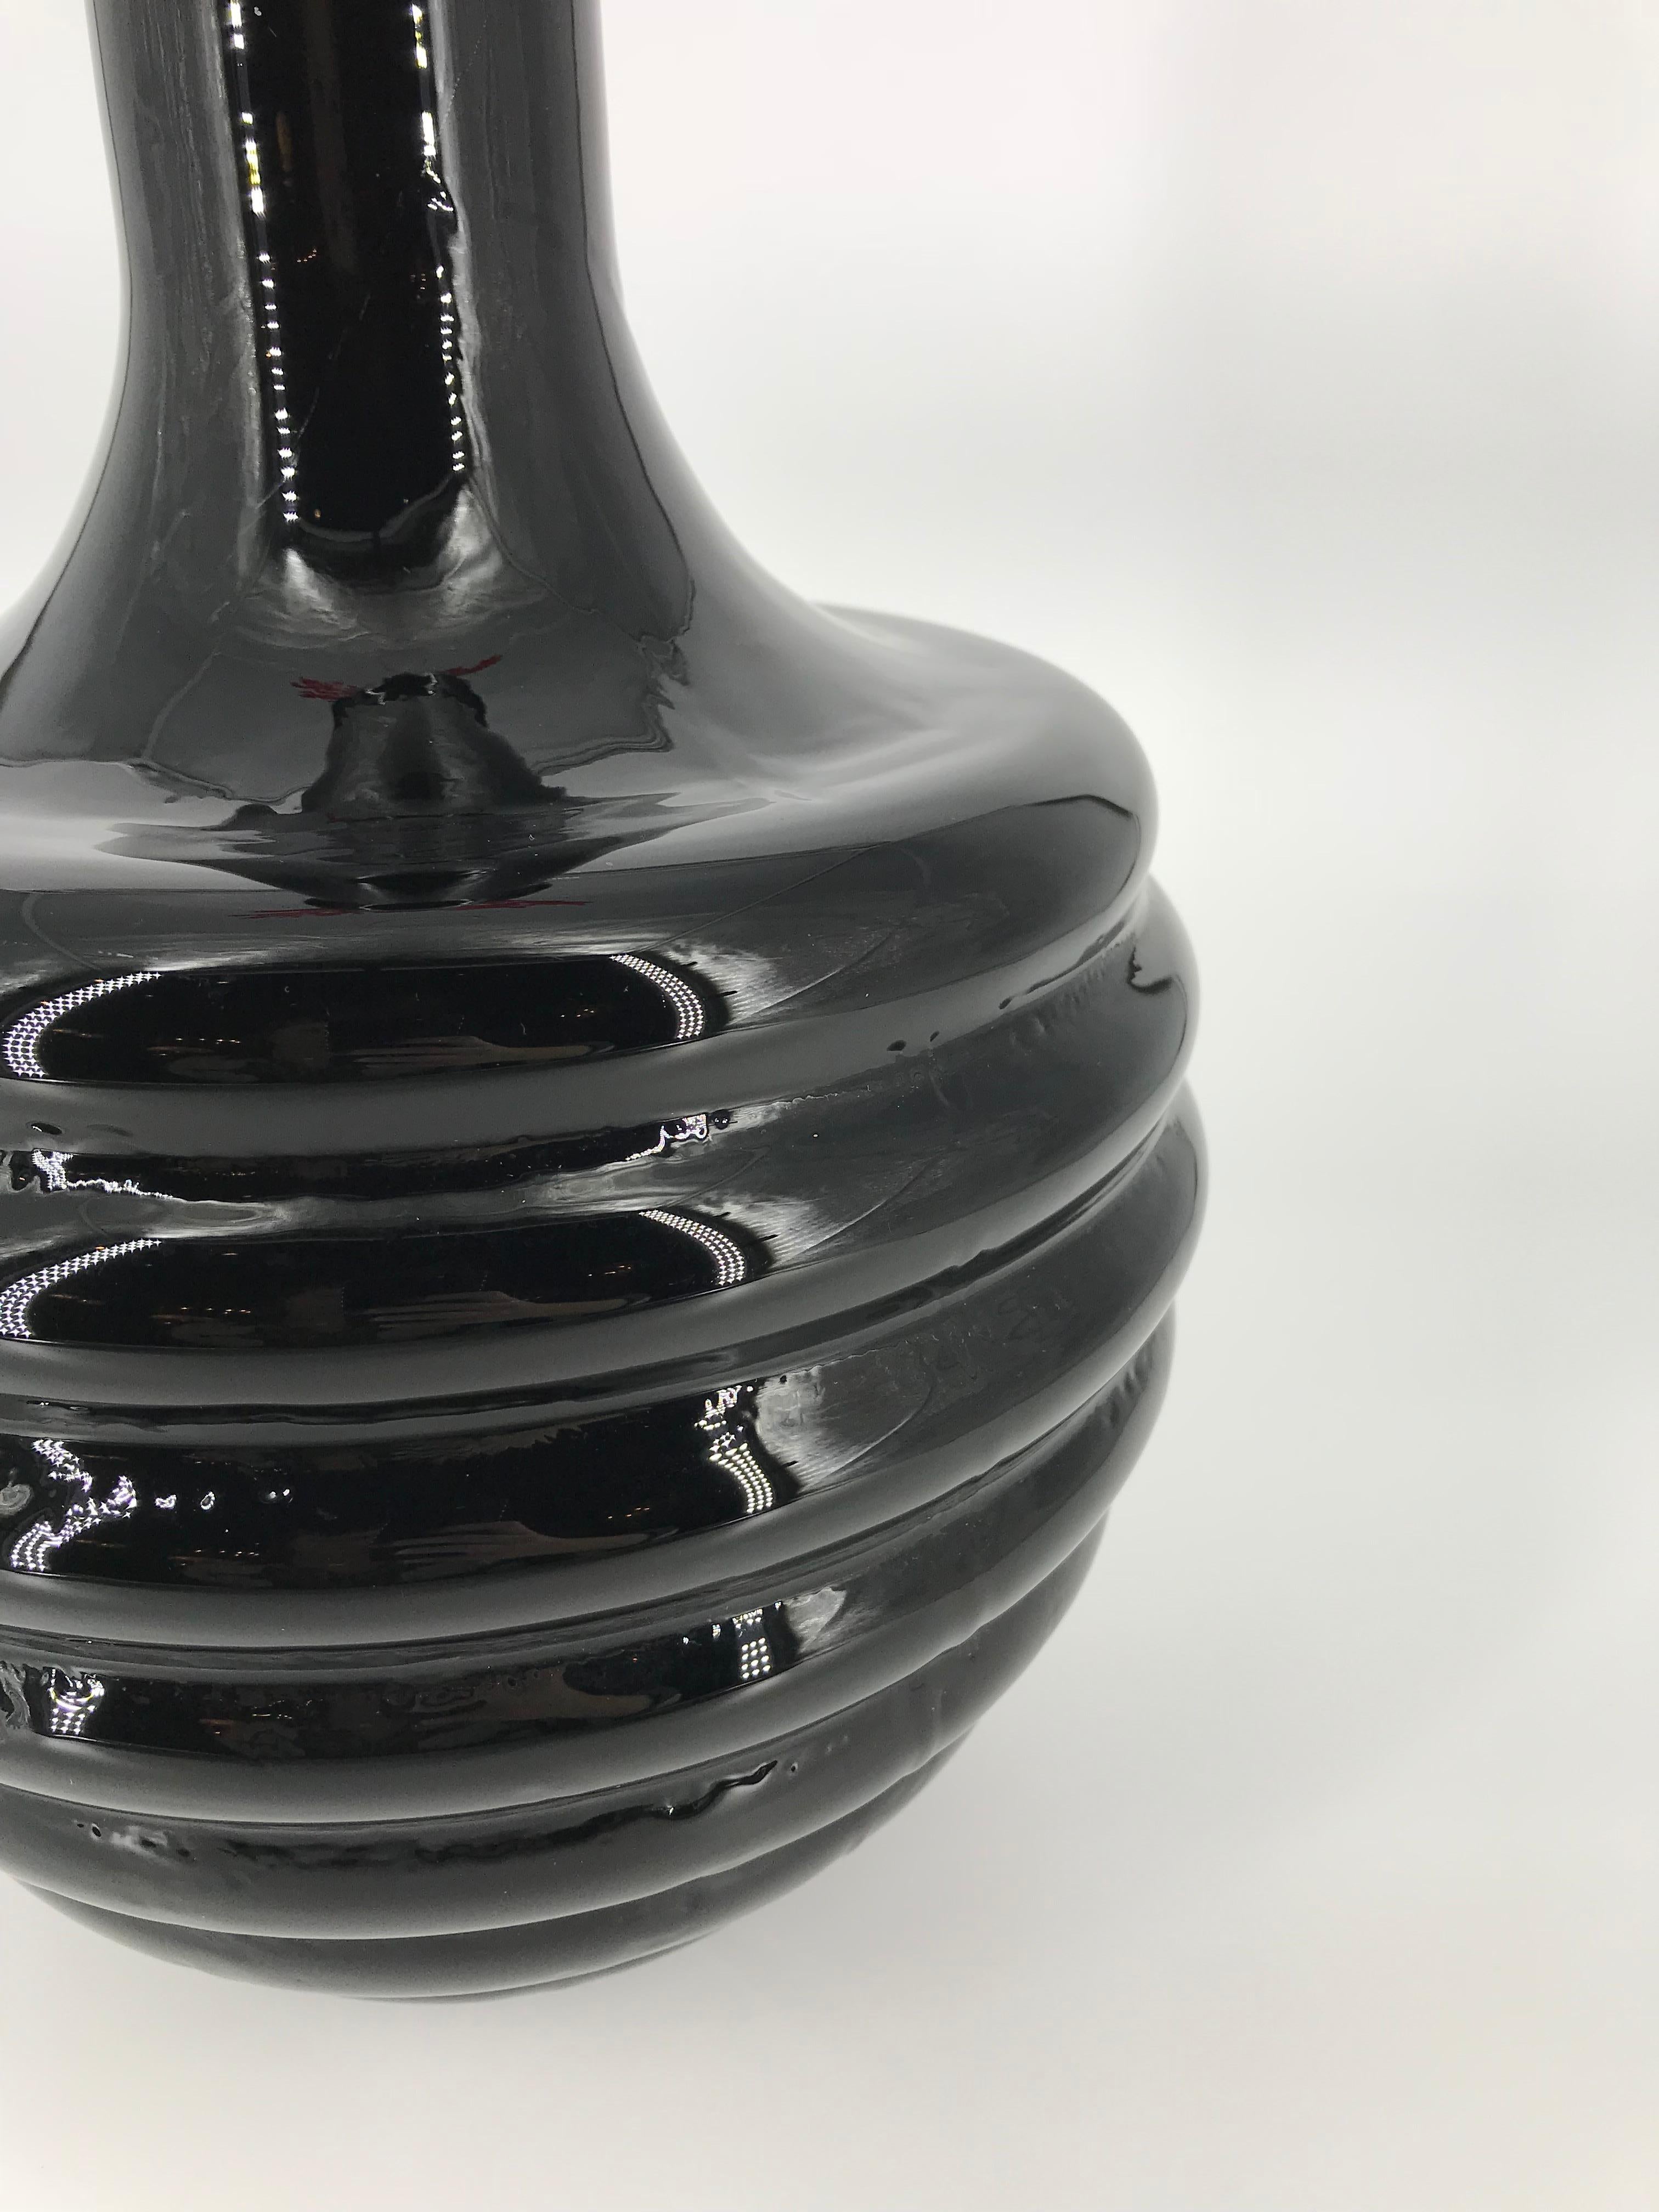 Black Murano glass  jar e with a bottle shape and a red coral stopper.
Made in Italy, Murano city
2000's circa